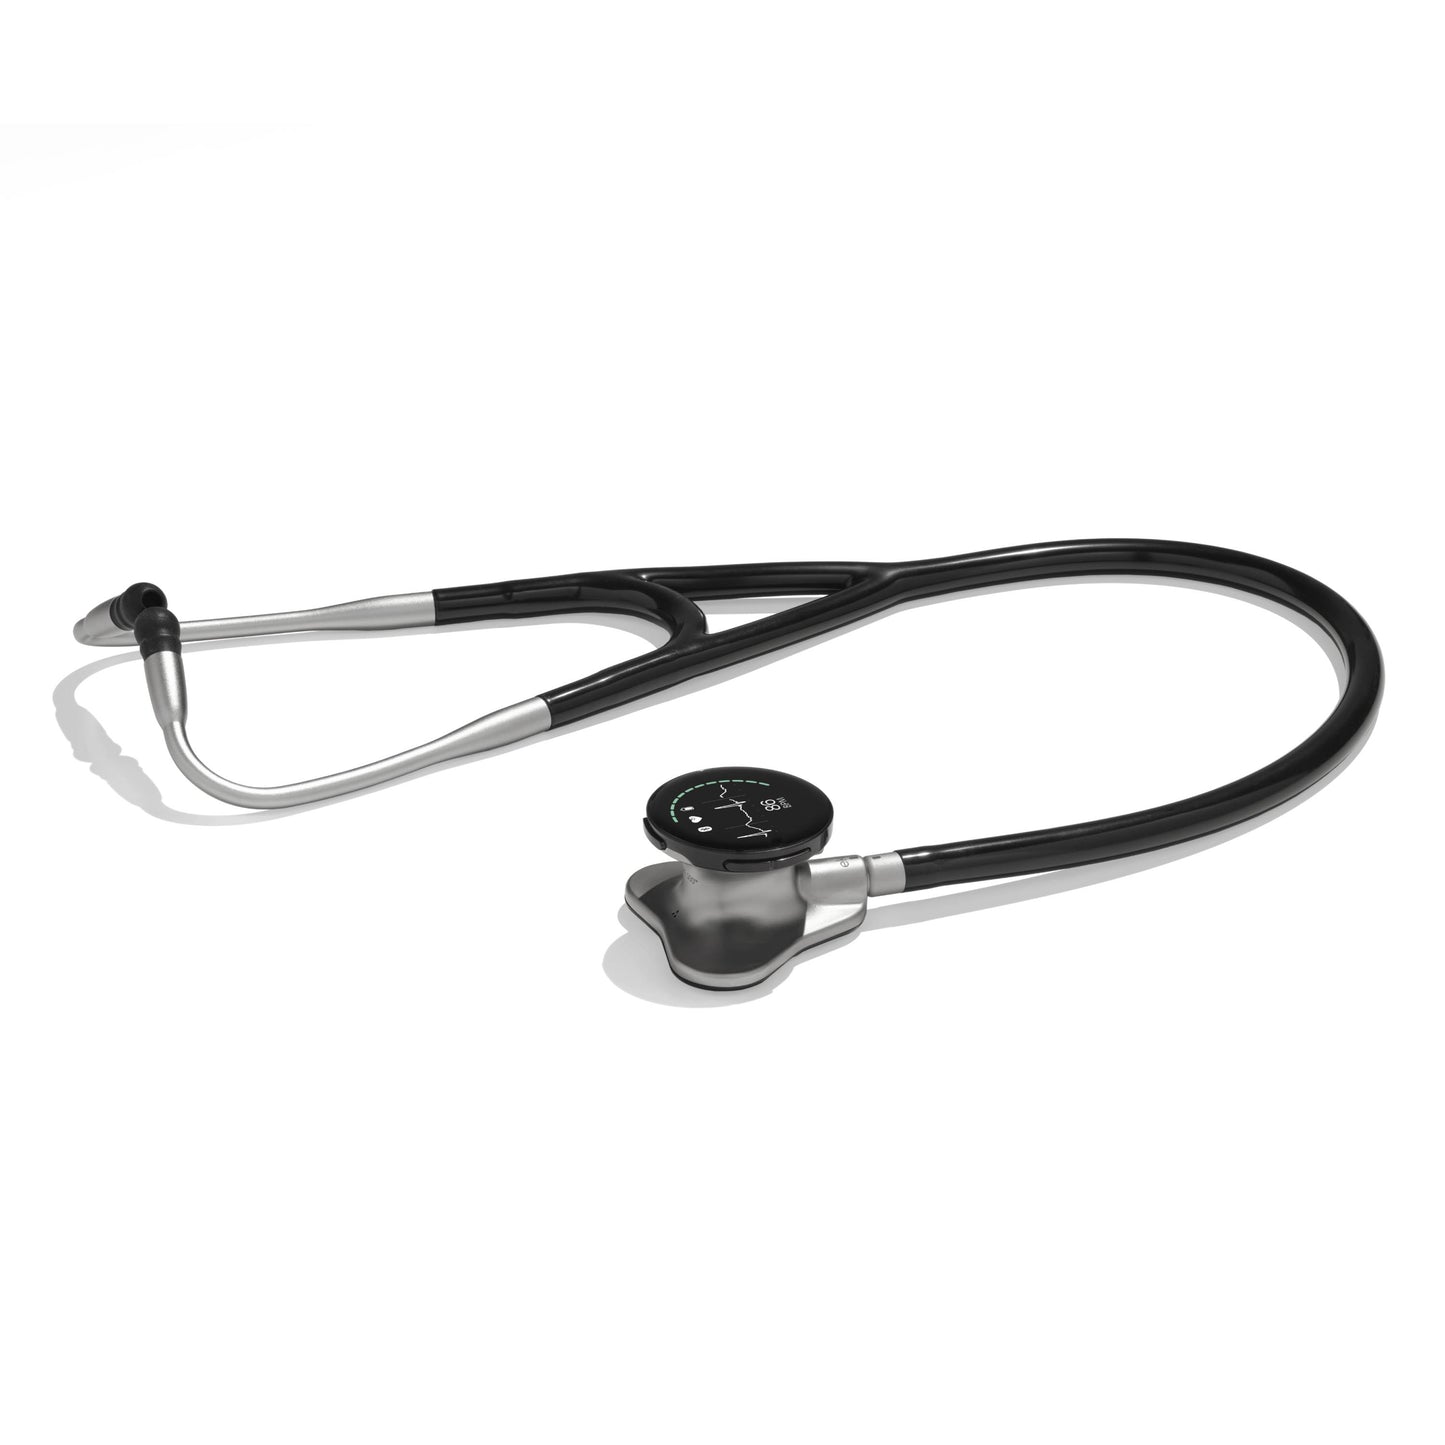 Eko Core 500 Digital Stethoscope - Black - ECG Stethoscope with Artificial Intelligence, Heart Sound Analysis, Bluetooth Enabled, Dual Head, Noise Cancelling